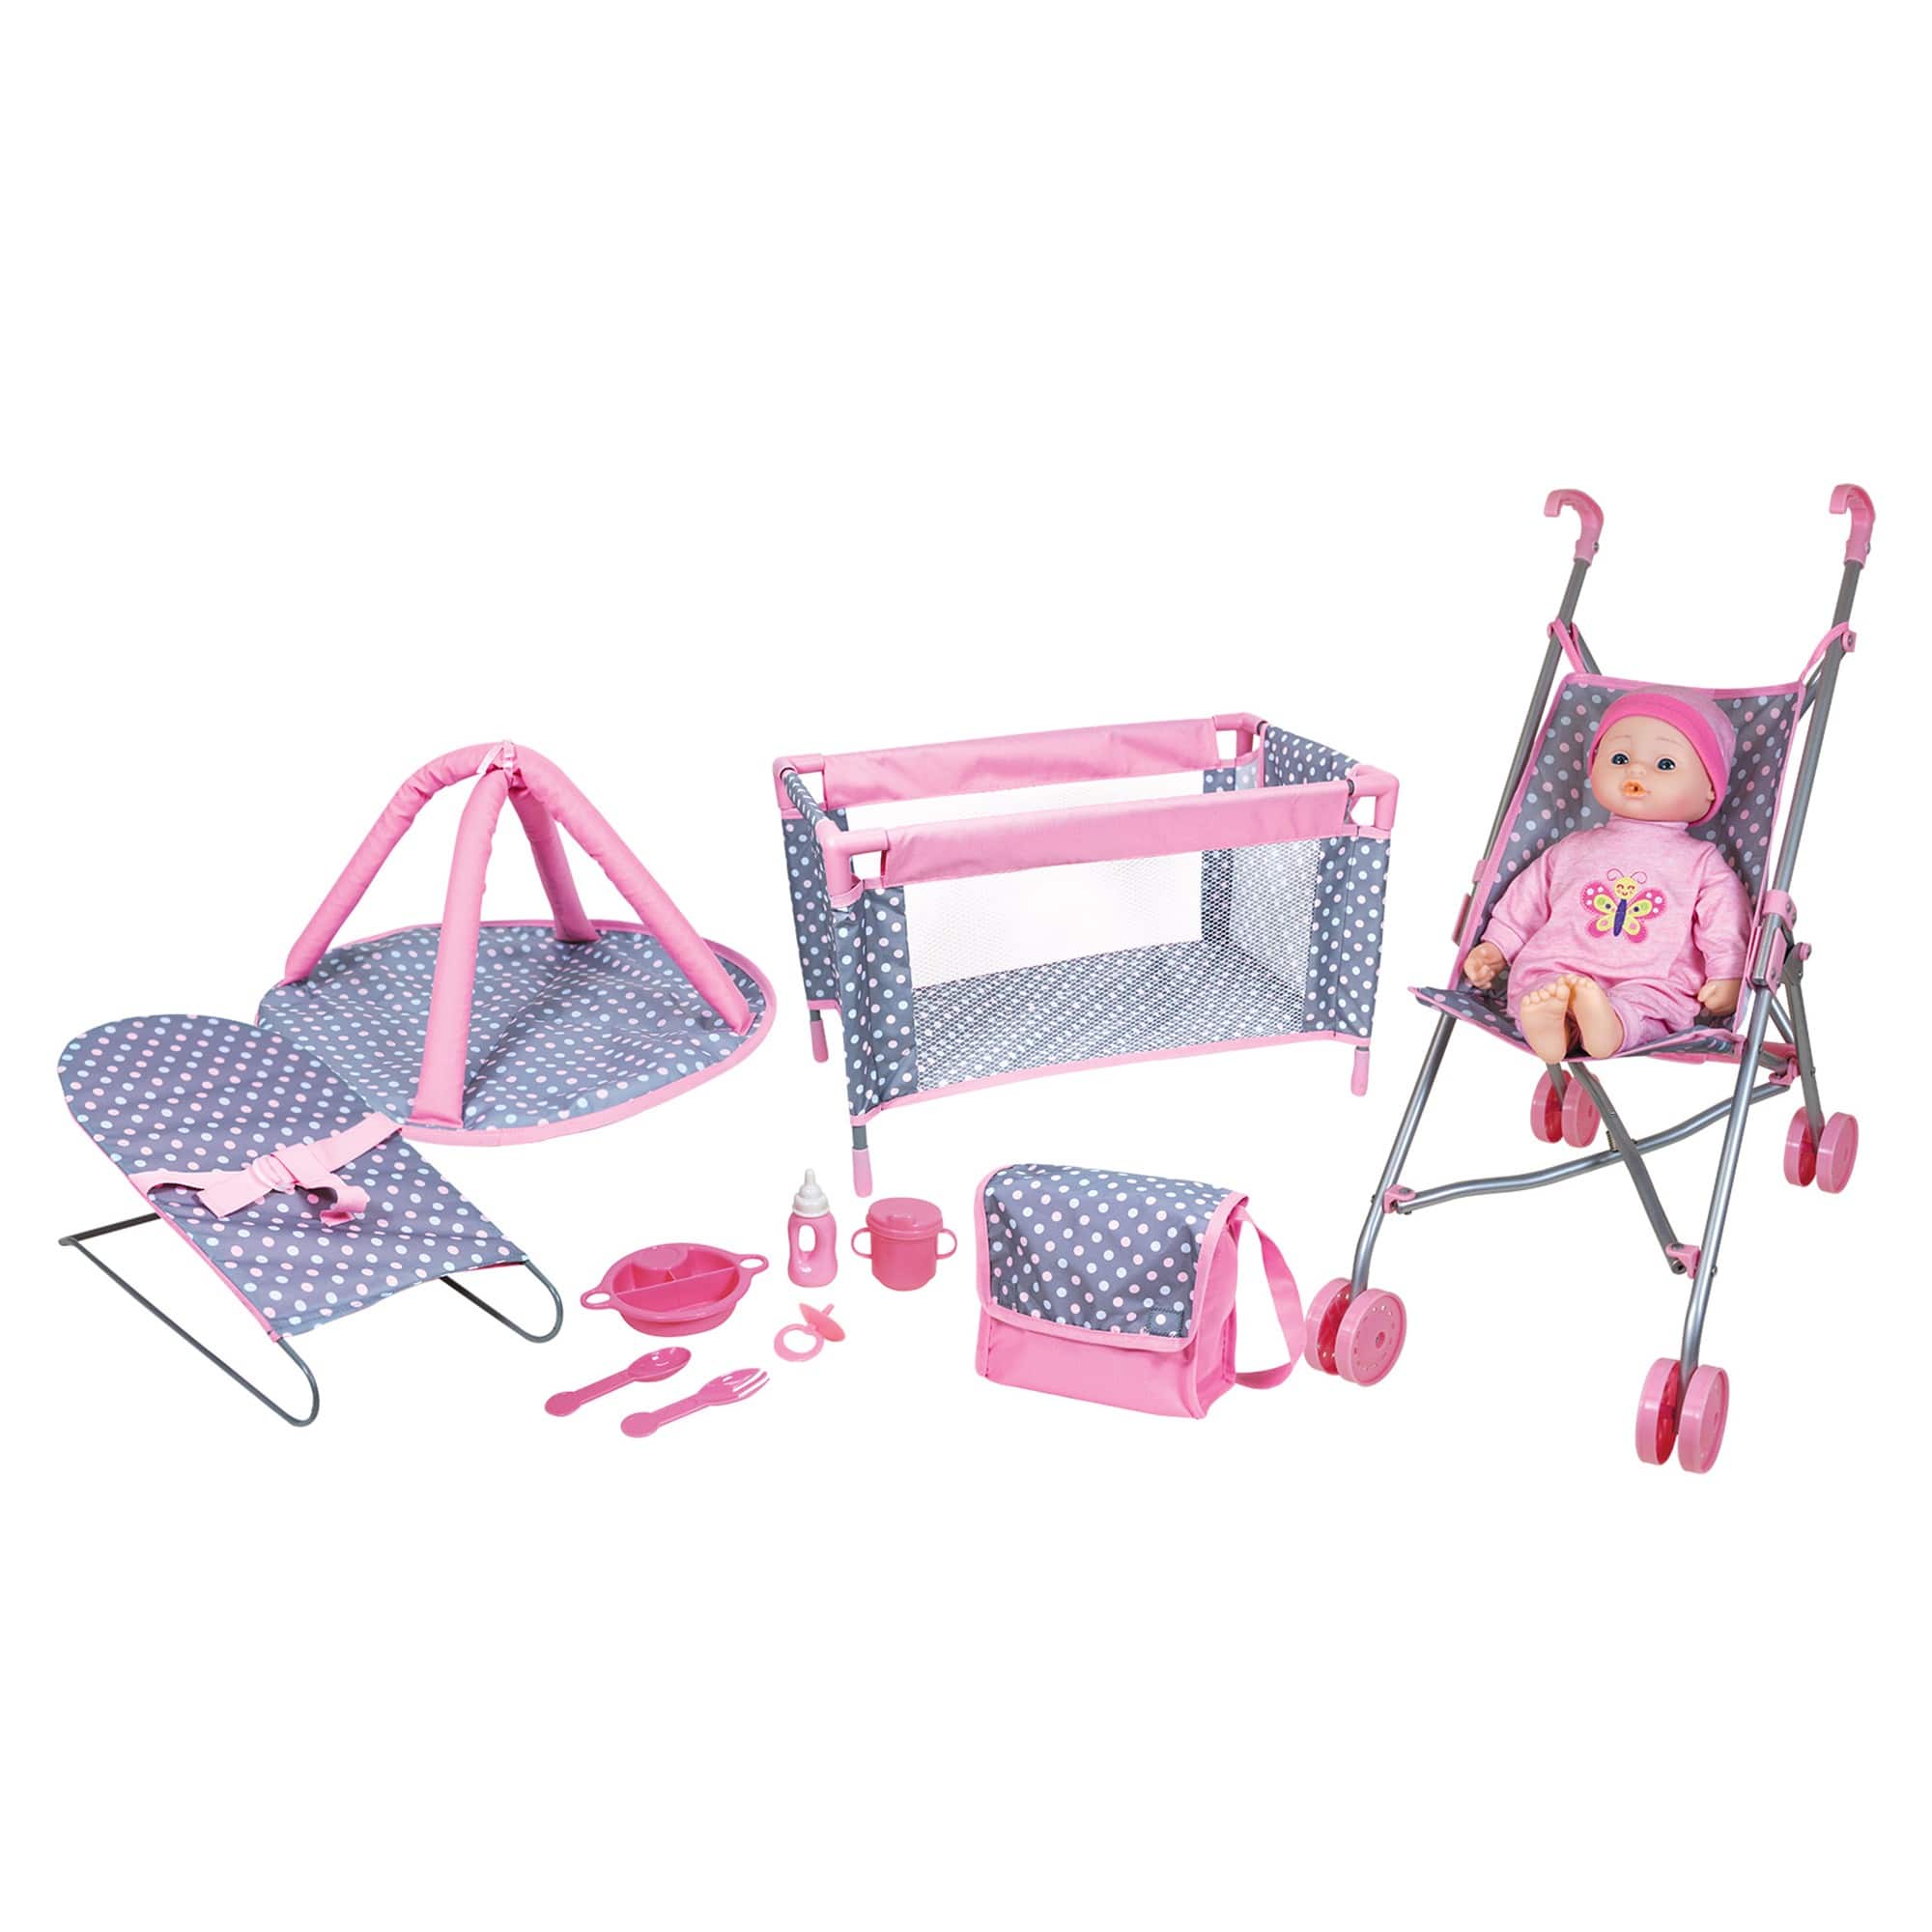 Lissi Dolls 5-Piece Play Set with Baby Doll and Accessories